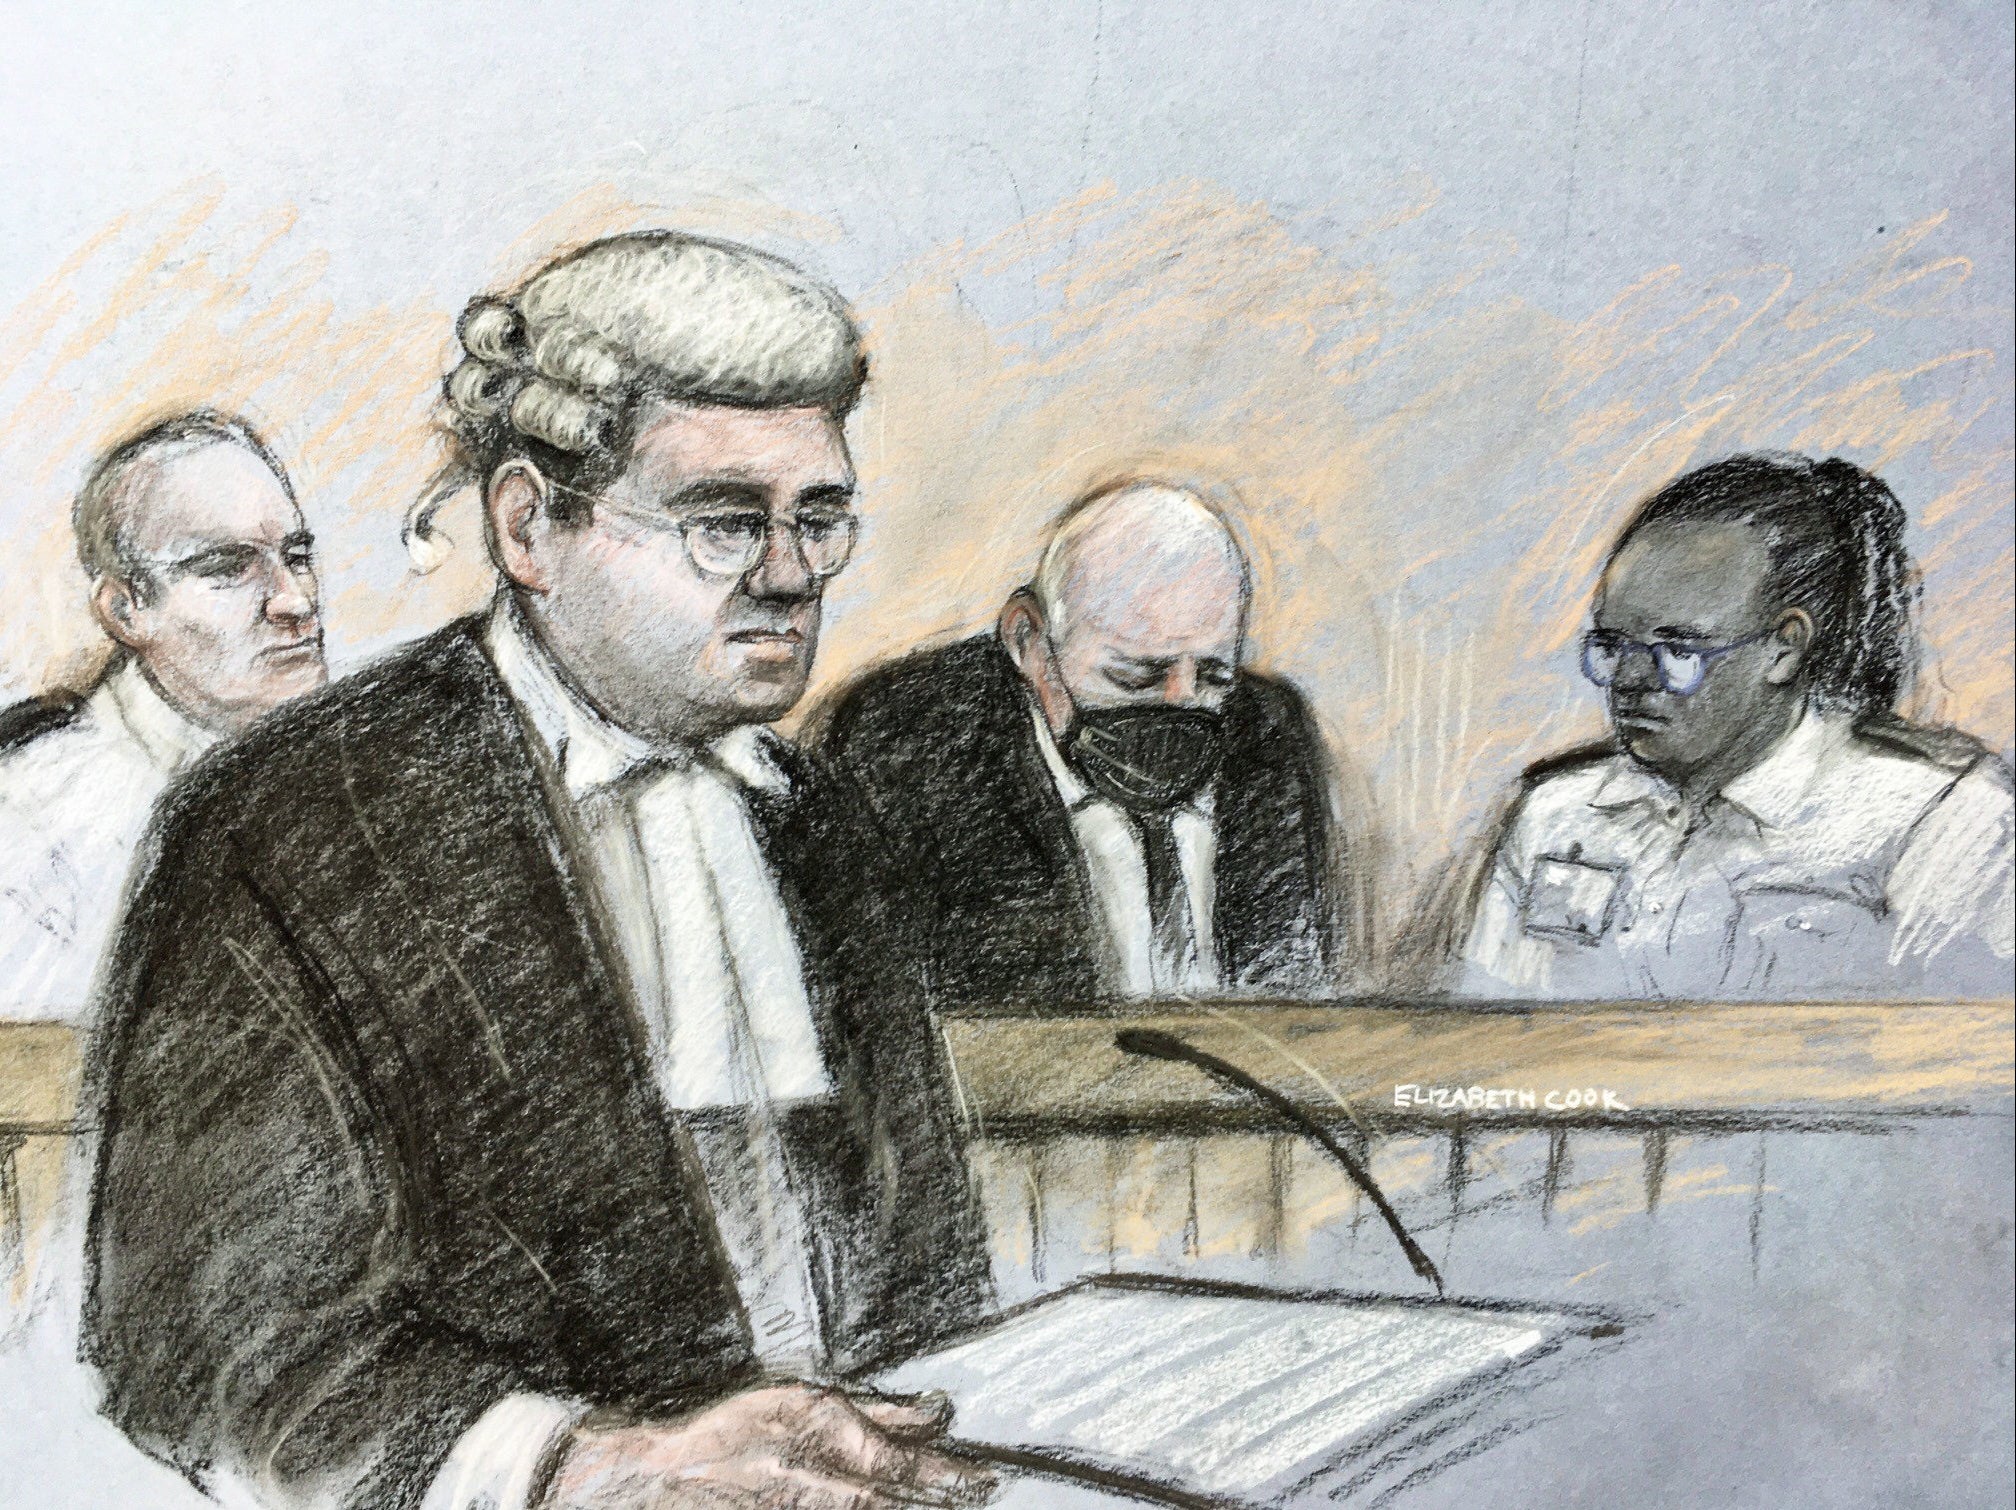 A court artist sketch of former Metropolitan Police officer Wayne Couzens (centre) at the Old Bailey in London